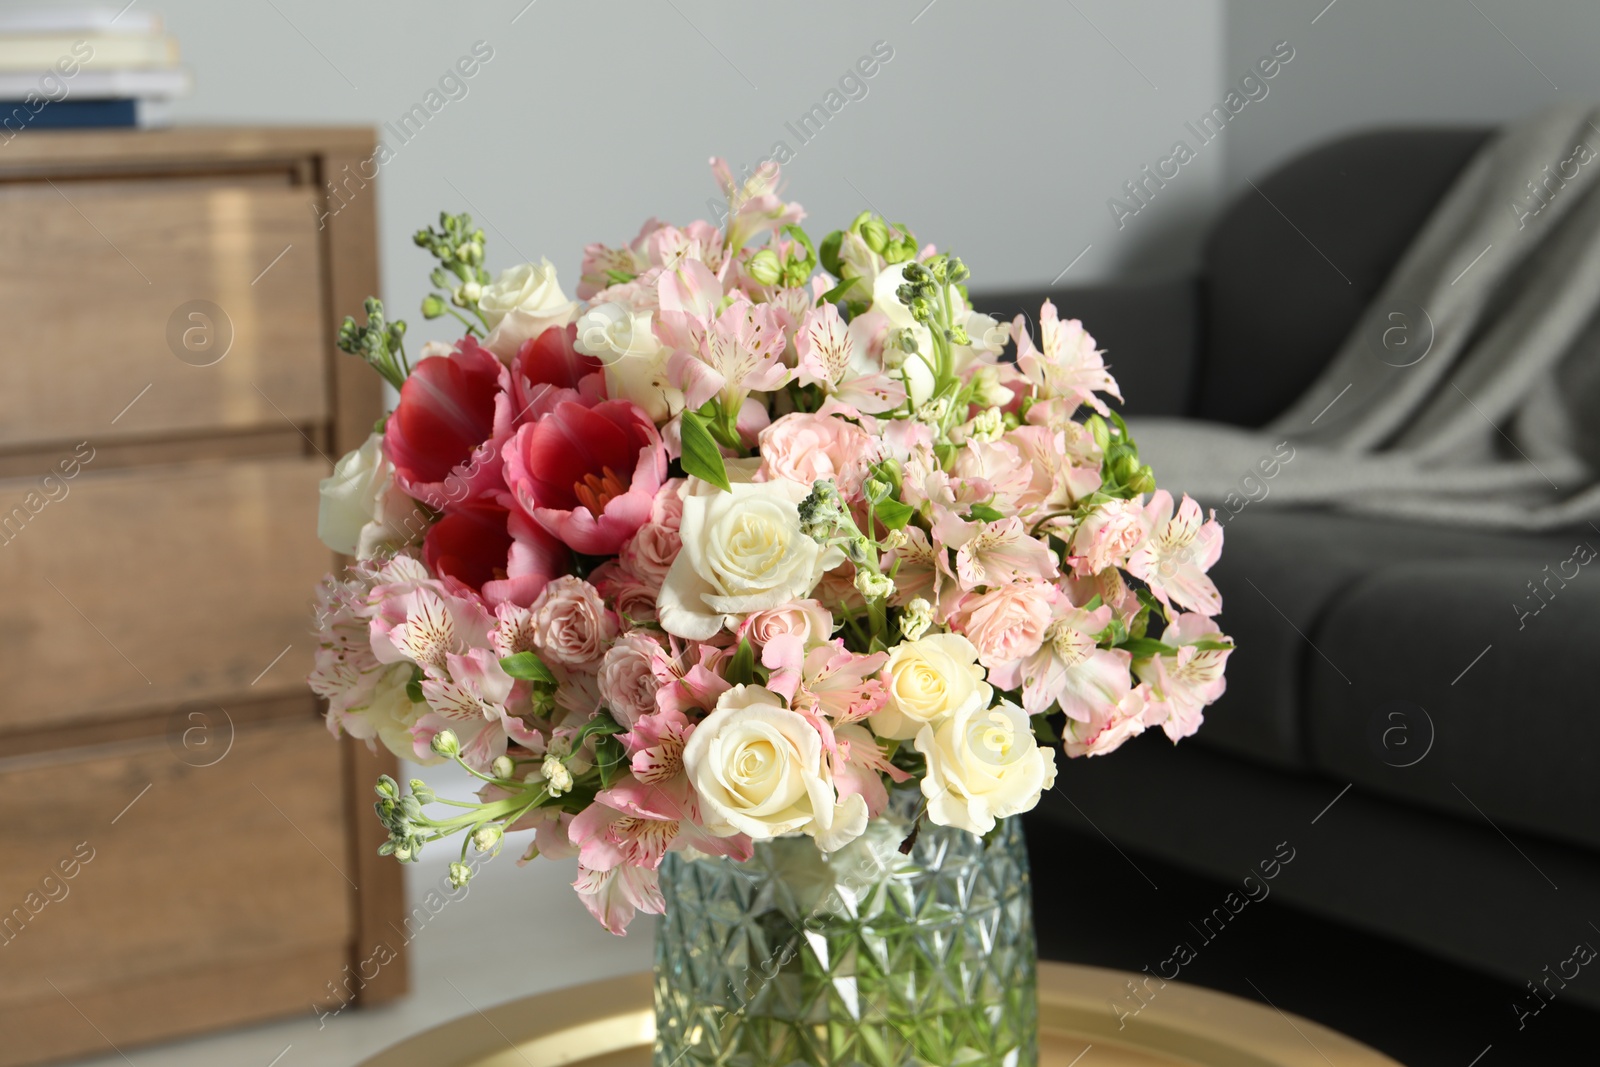 Photo of Beautiful bouquet of fresh flowers on coffee table in room